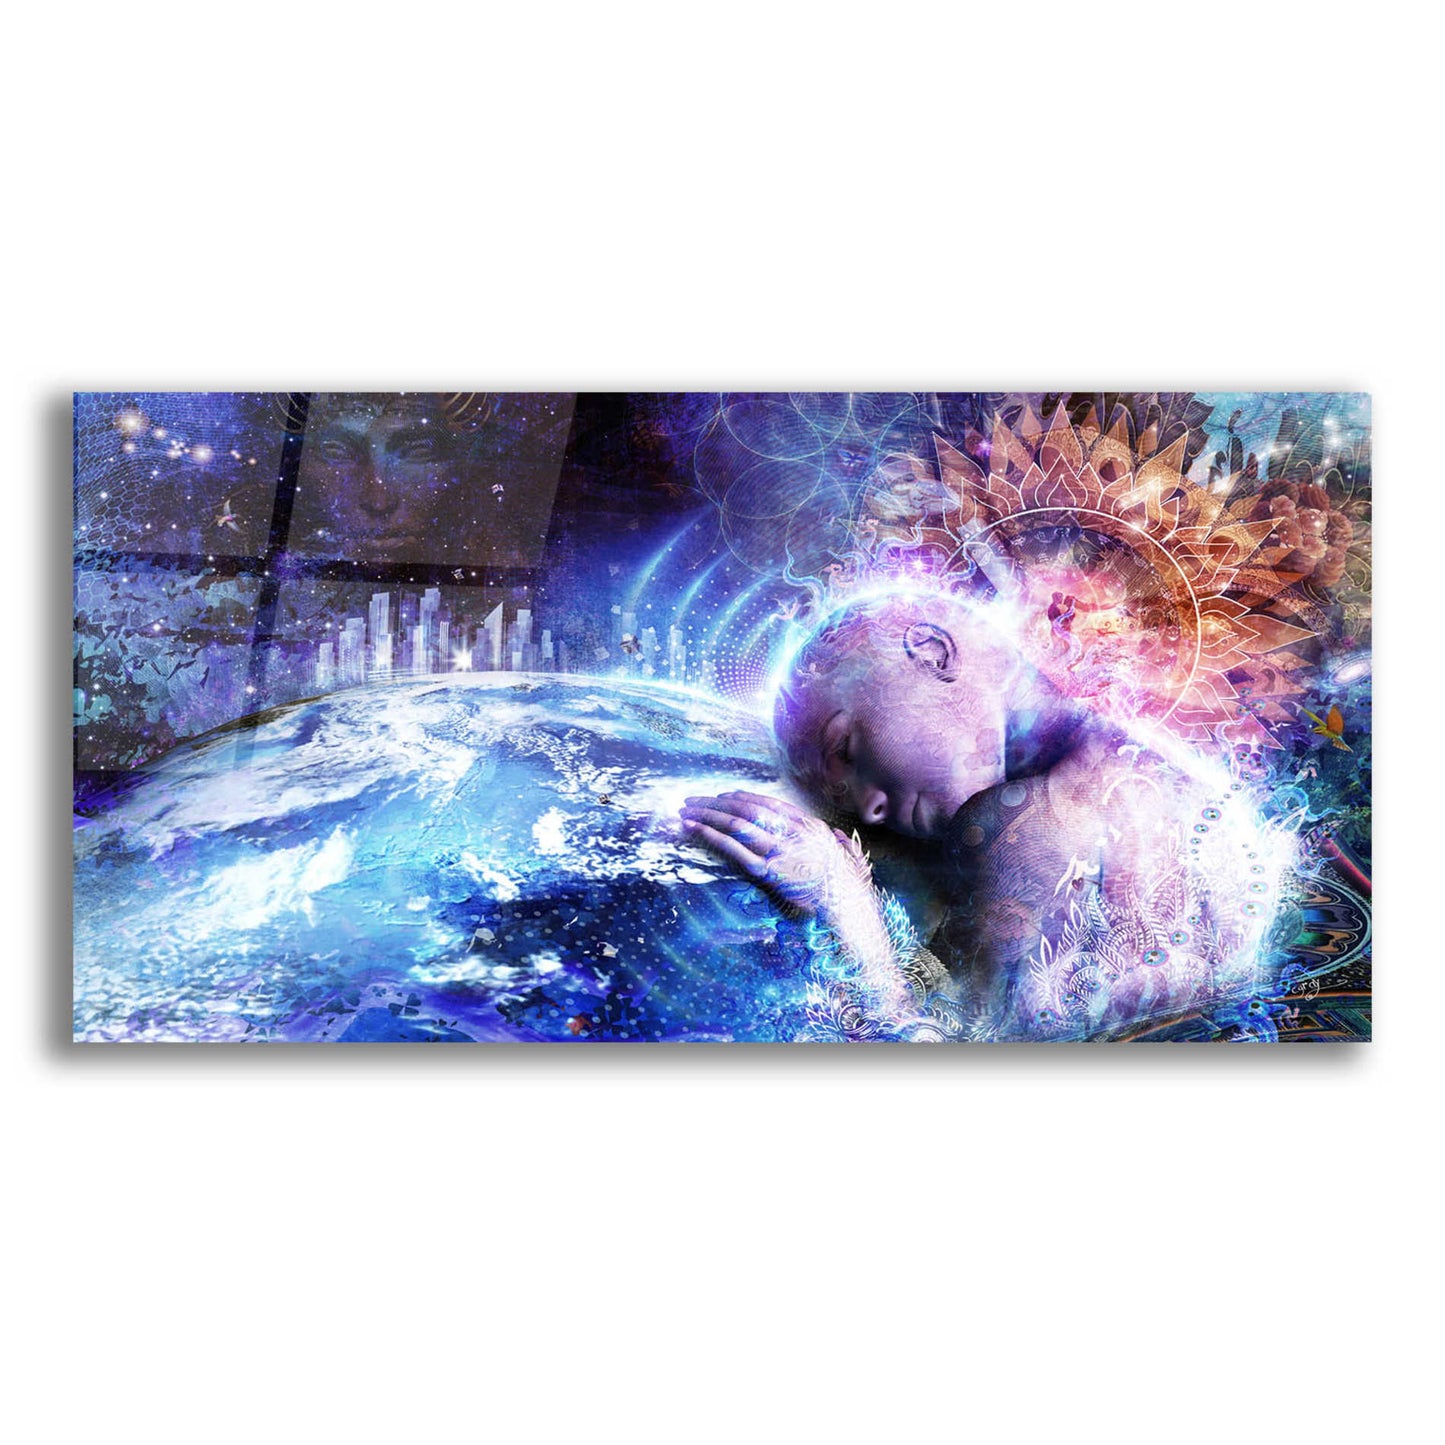 Epic Art 'A Prayer For The Earth' by Cameron Gray, Acrylic Glass Wall Art,24x12